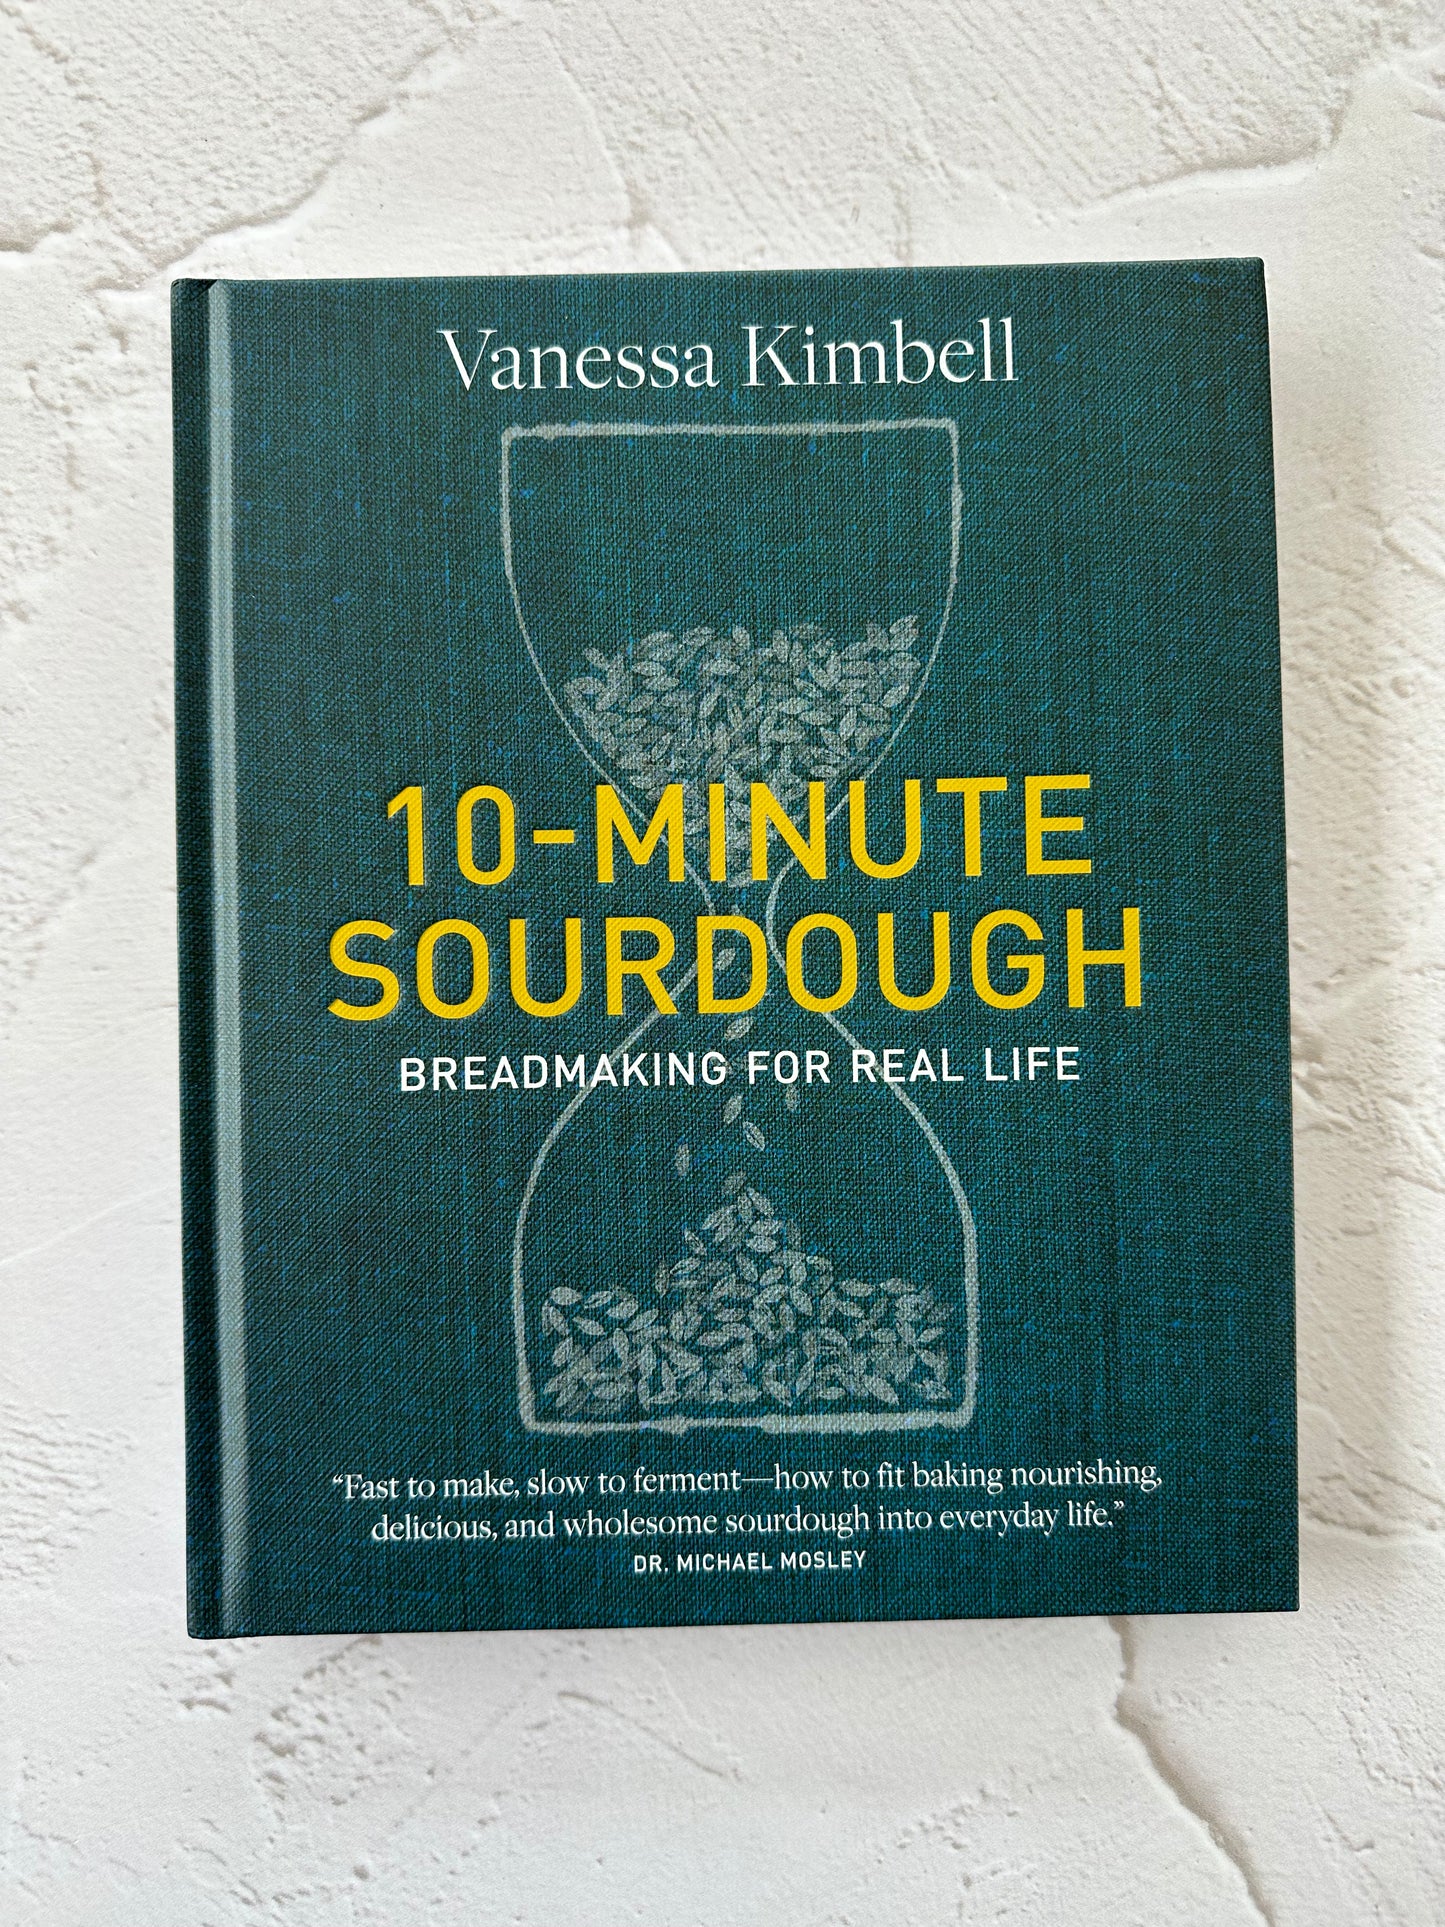 10-minute Sourdough: Bread making for real life - Vanessa Kimbell